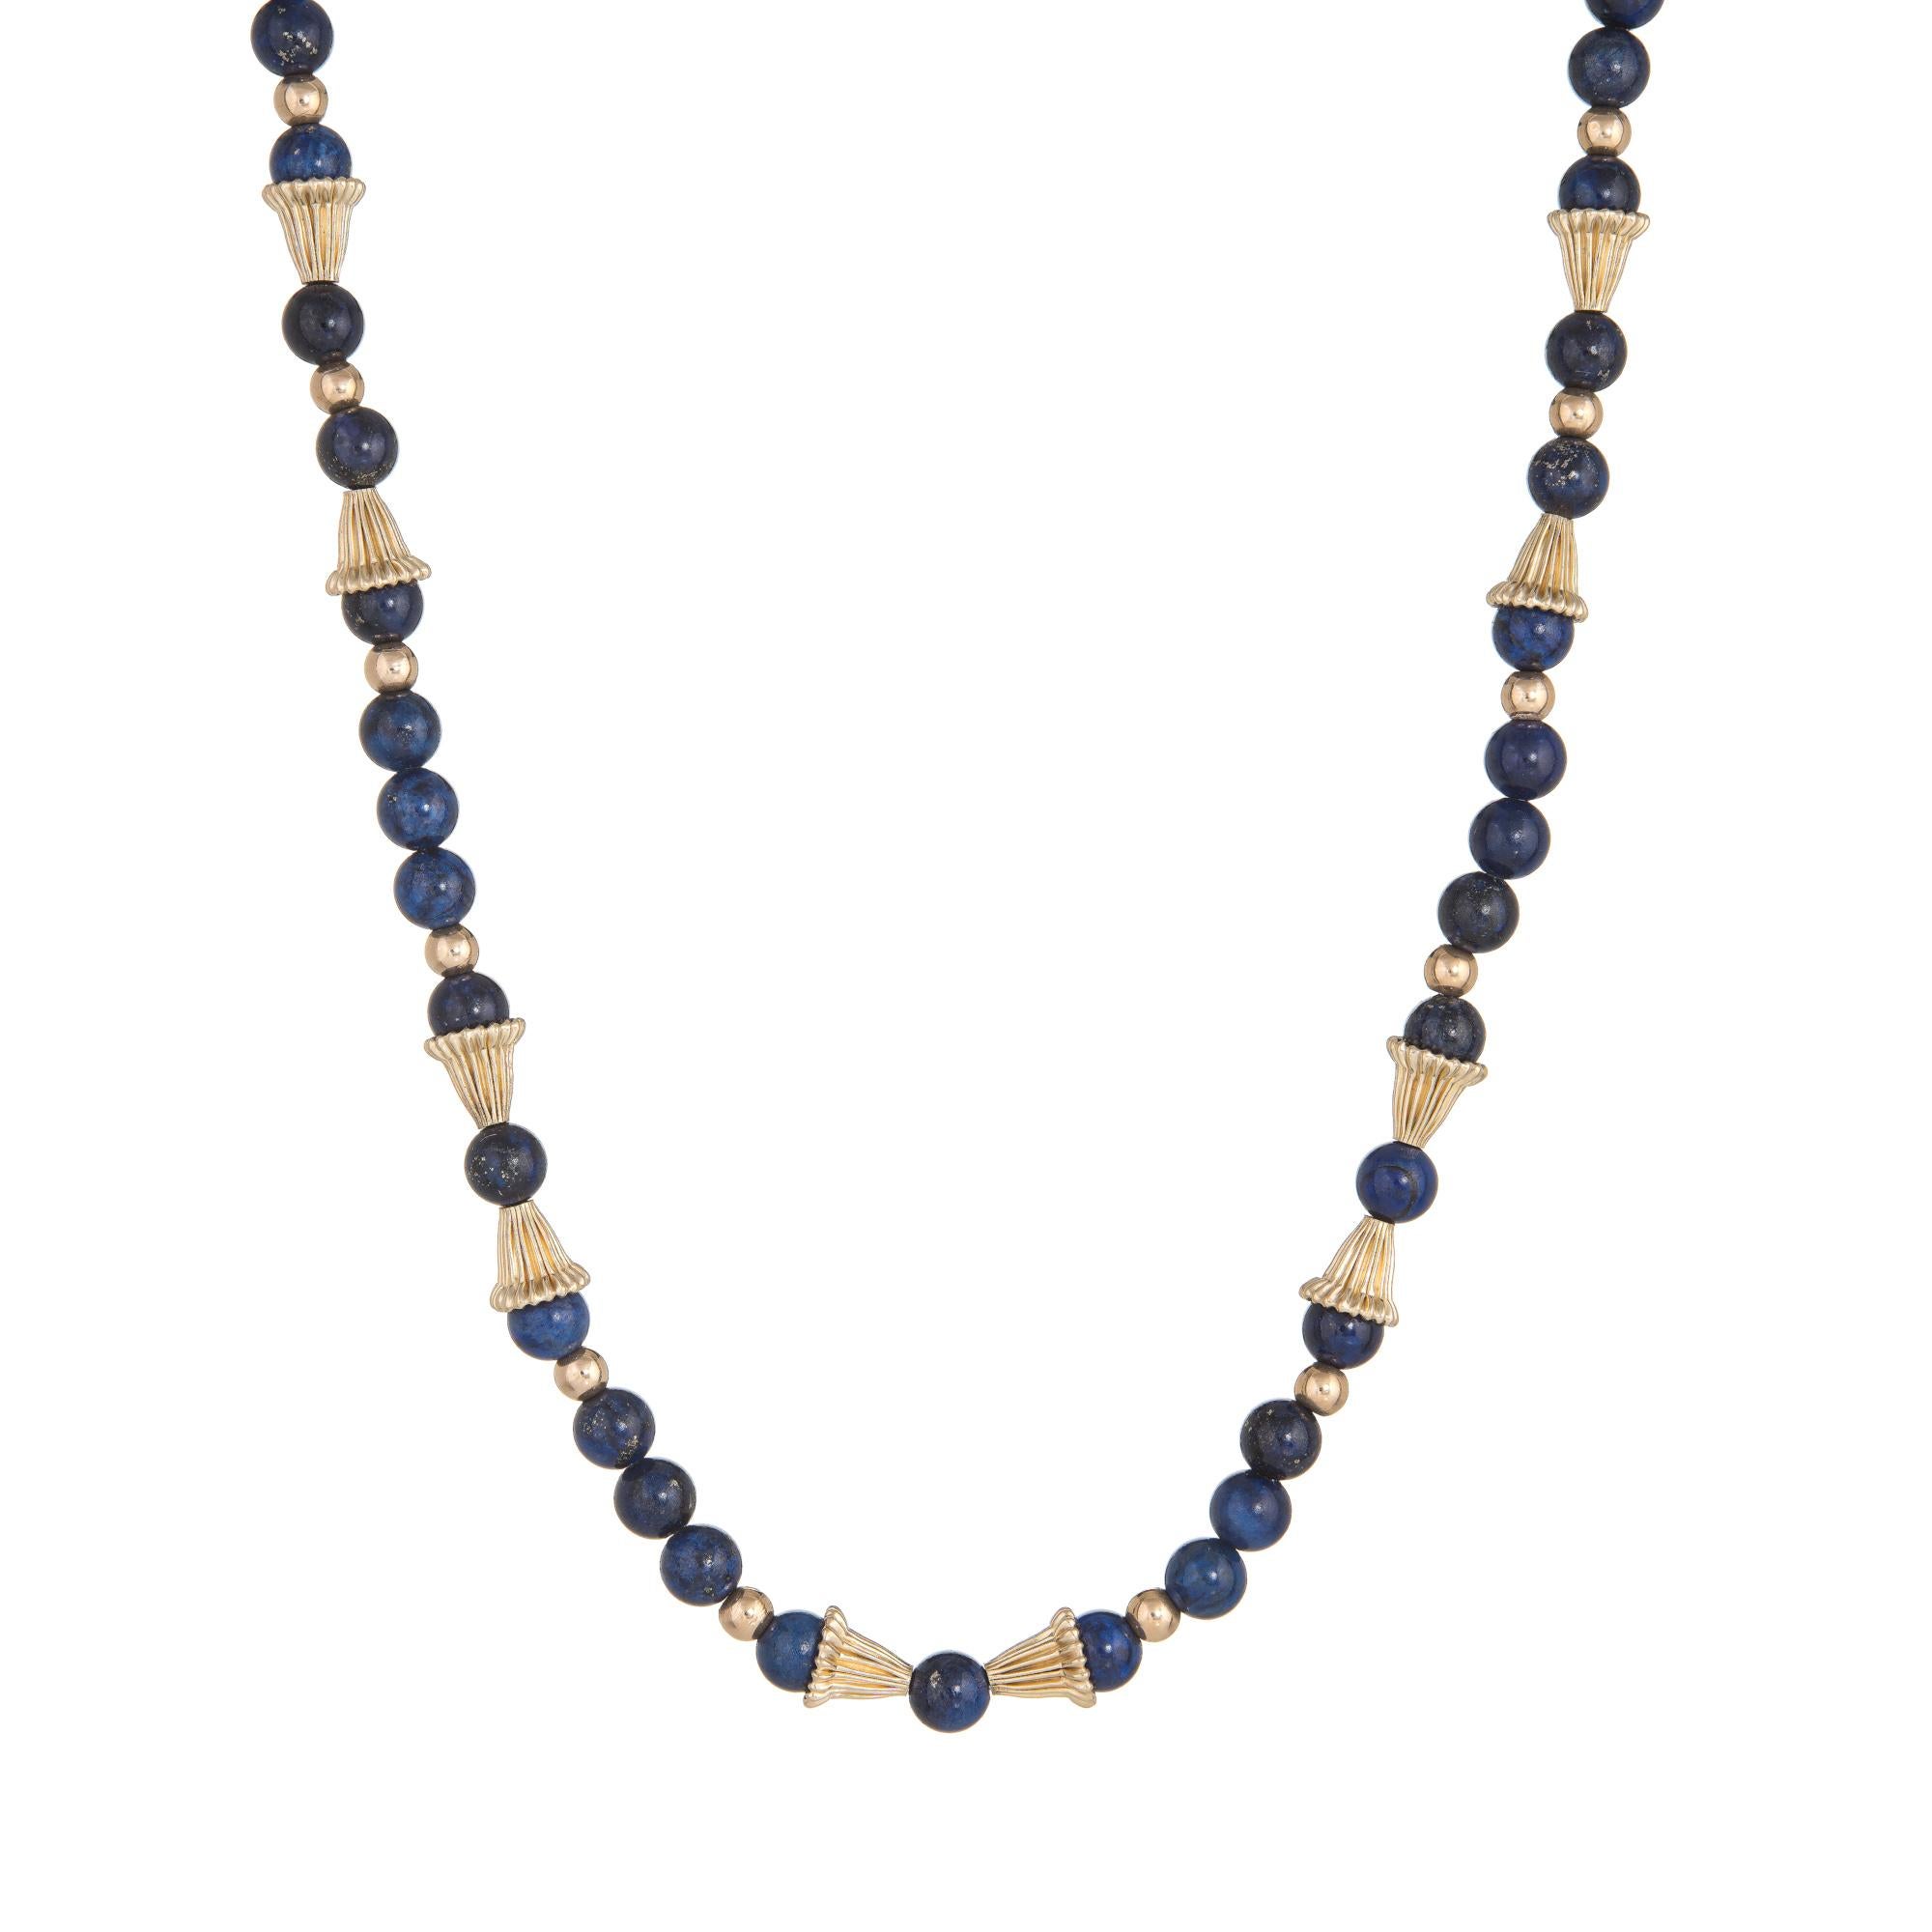 Elegant vintage lapis lazuli necklace (circa 1960s to 1970s) with 14 karat yellow gold bead separators.

Lapis lazuli beads each measure 6mm. The lapis beads are in excellent condition and free of cracks or chips.

The necklace measures 21 inches in